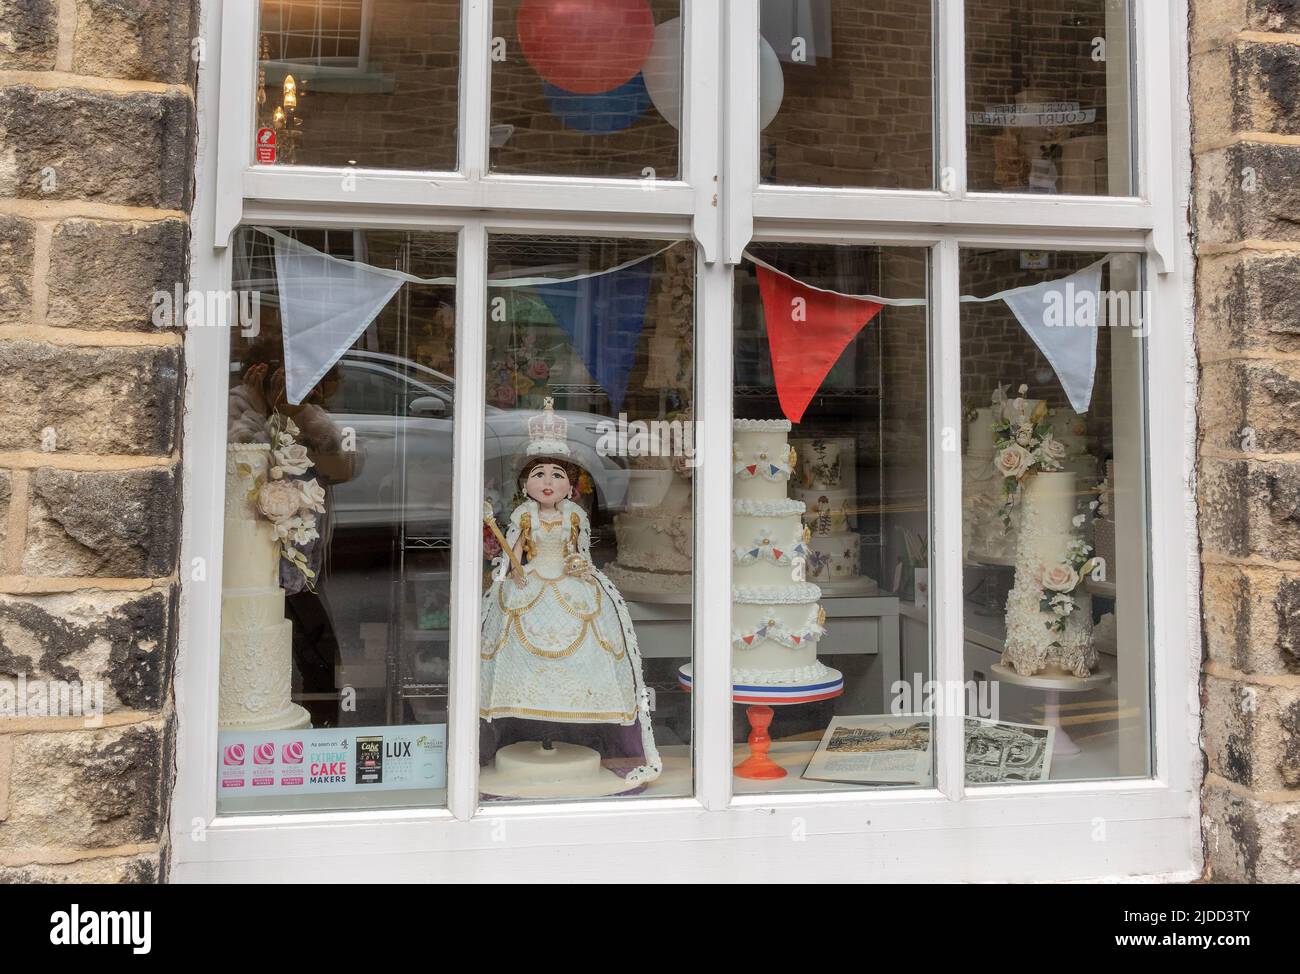 Village cake shop widow display with Queen Jubilee cakes decoration in Saddleworth, England. Stock Photo